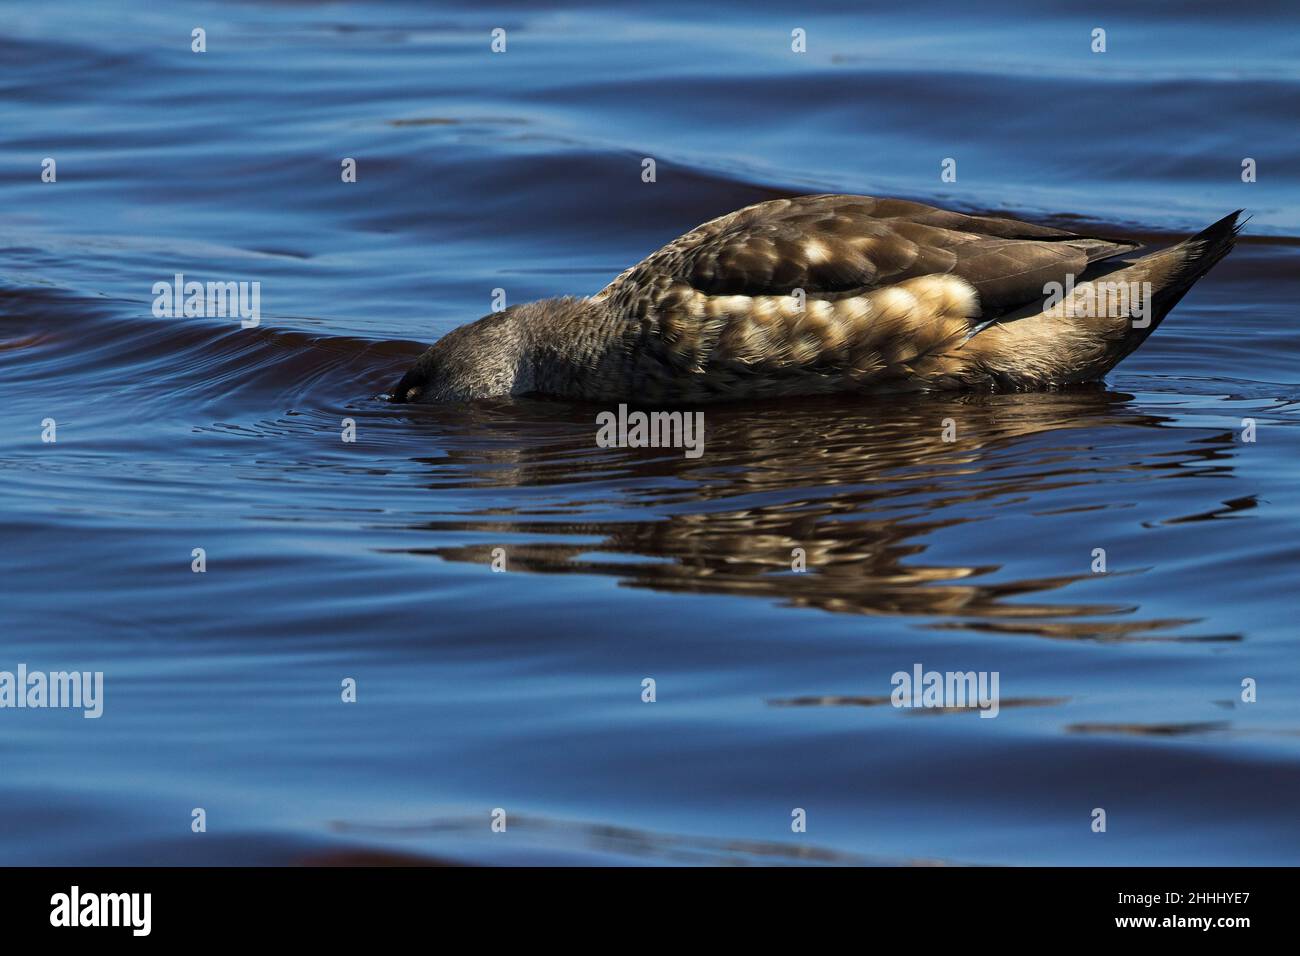 Crested duck Lophonetta specularioides specularioides swimming with its face under water on the sea, Sea Lion Island Falkland Islands November 2015 Stock Photo